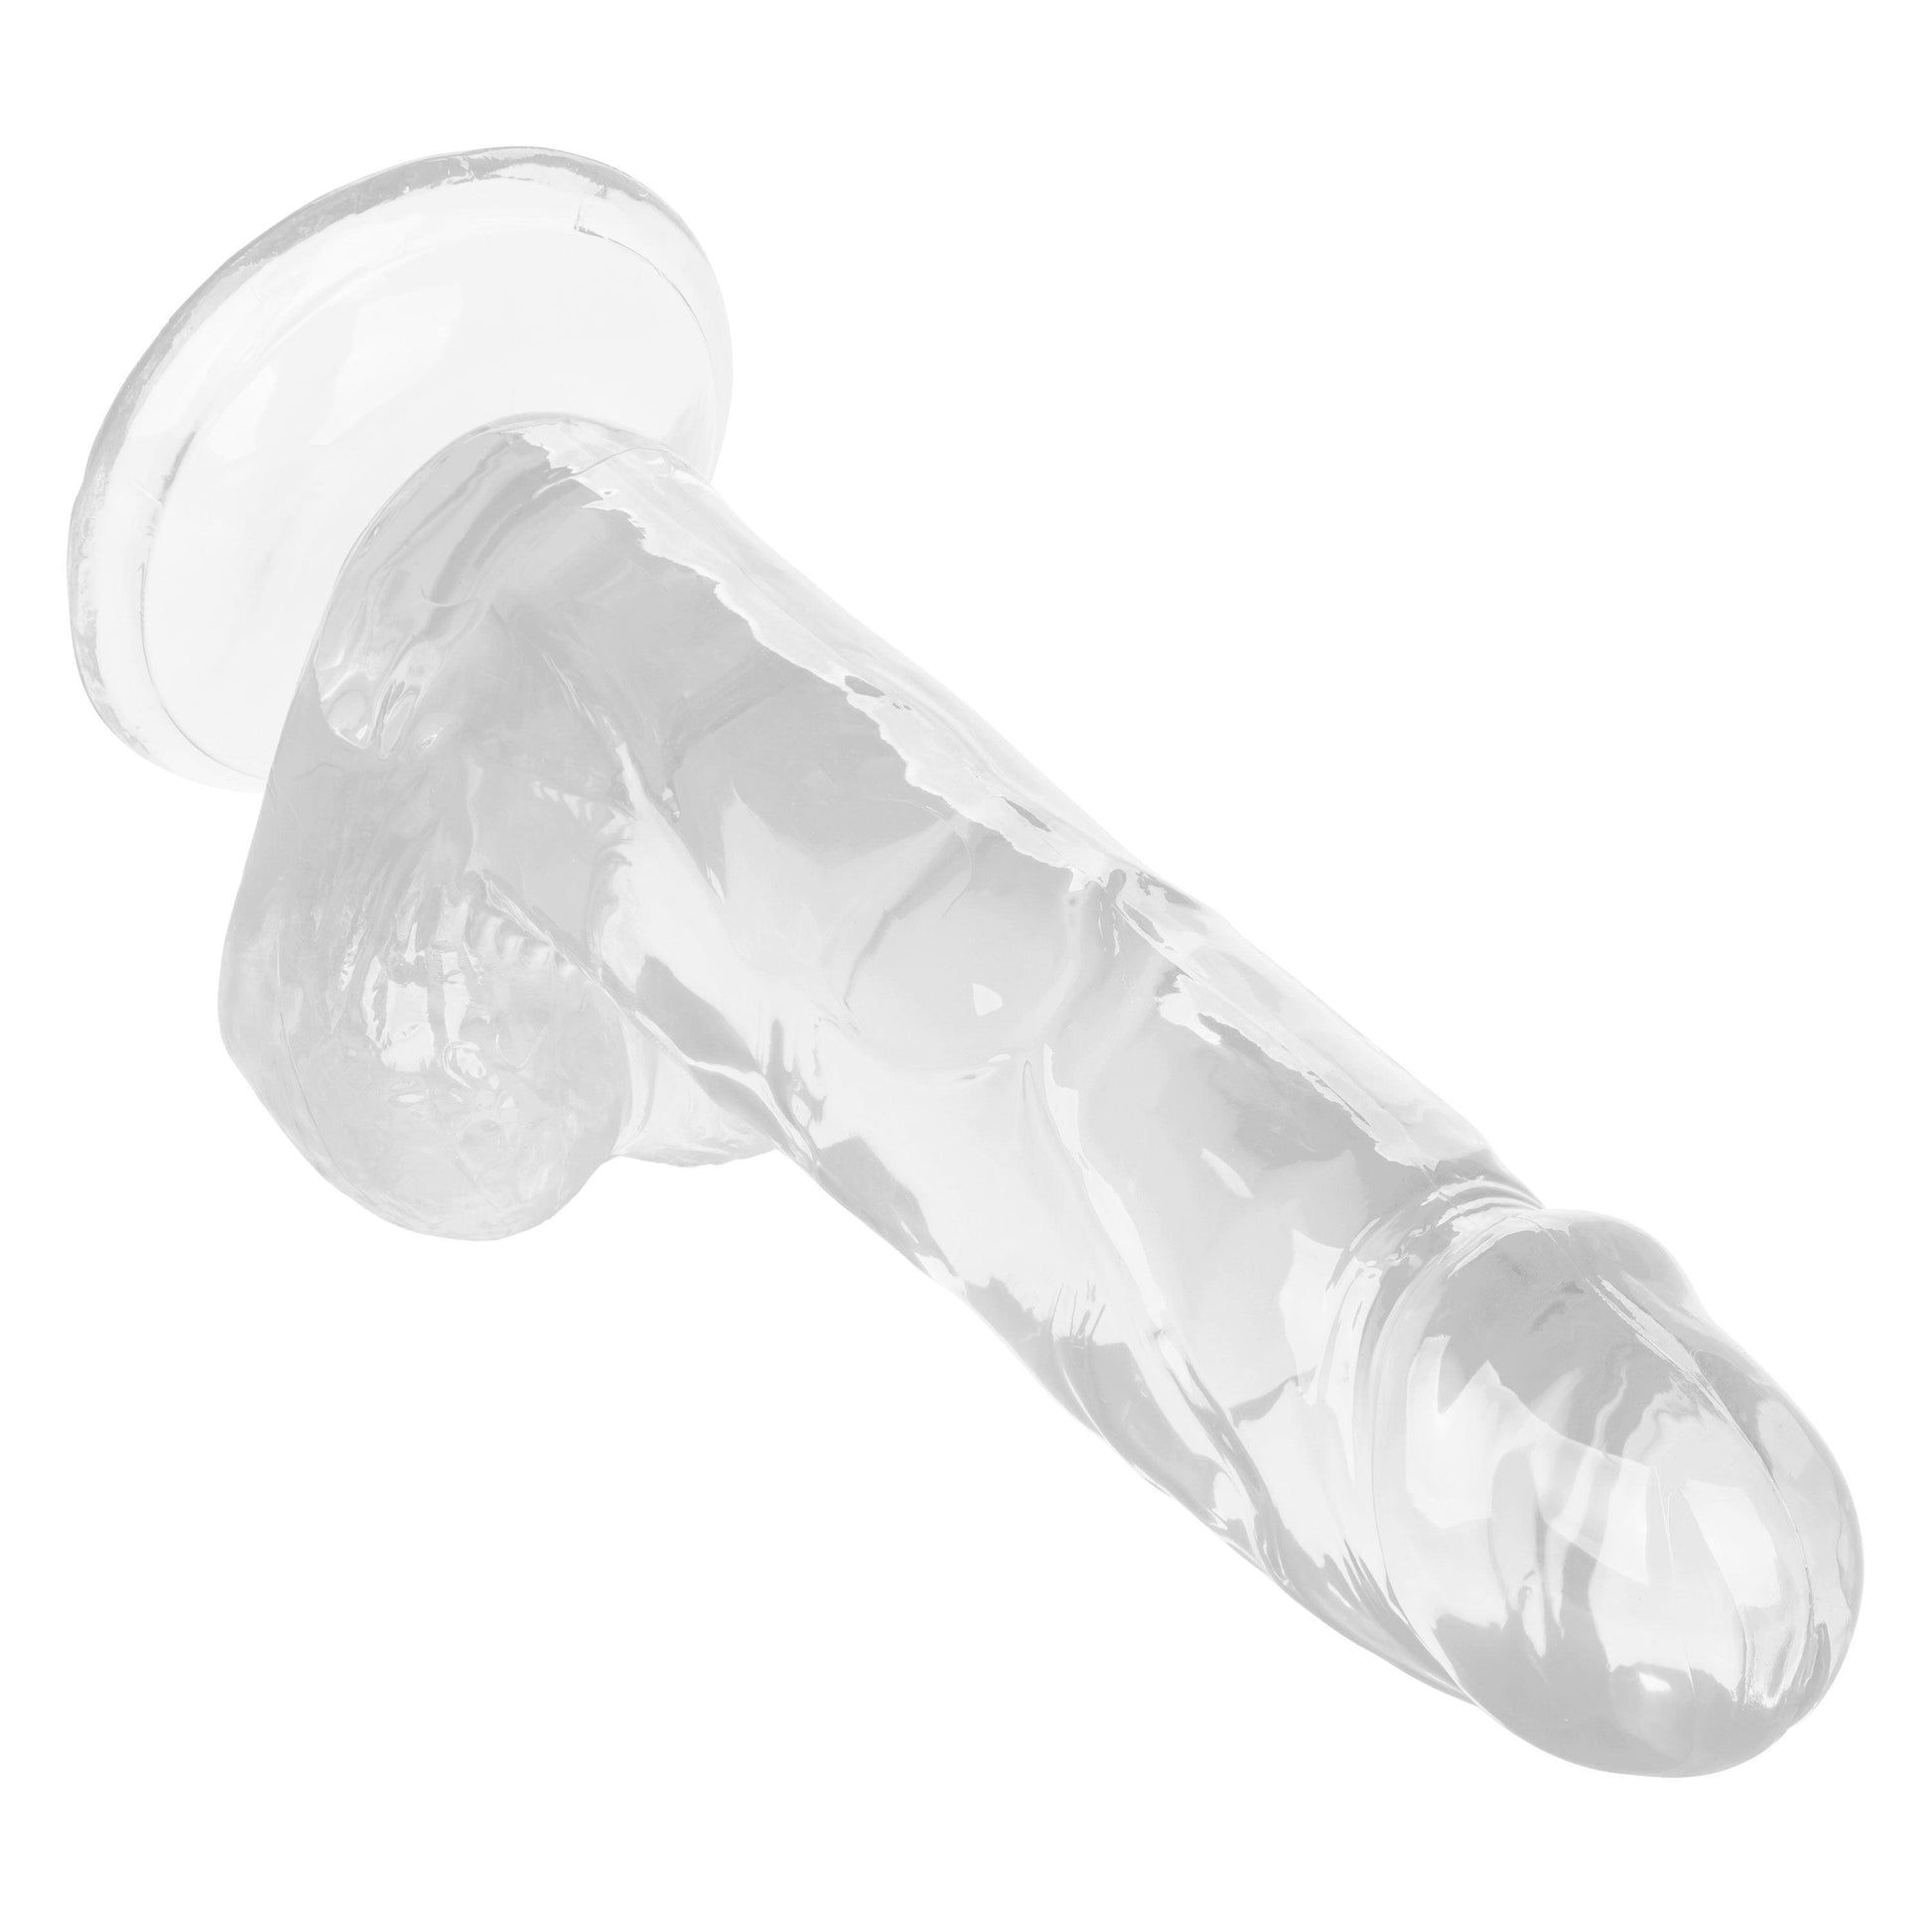 Size Queen 6 inch/15.25 Cm - Clear - My Sex Toy Hub